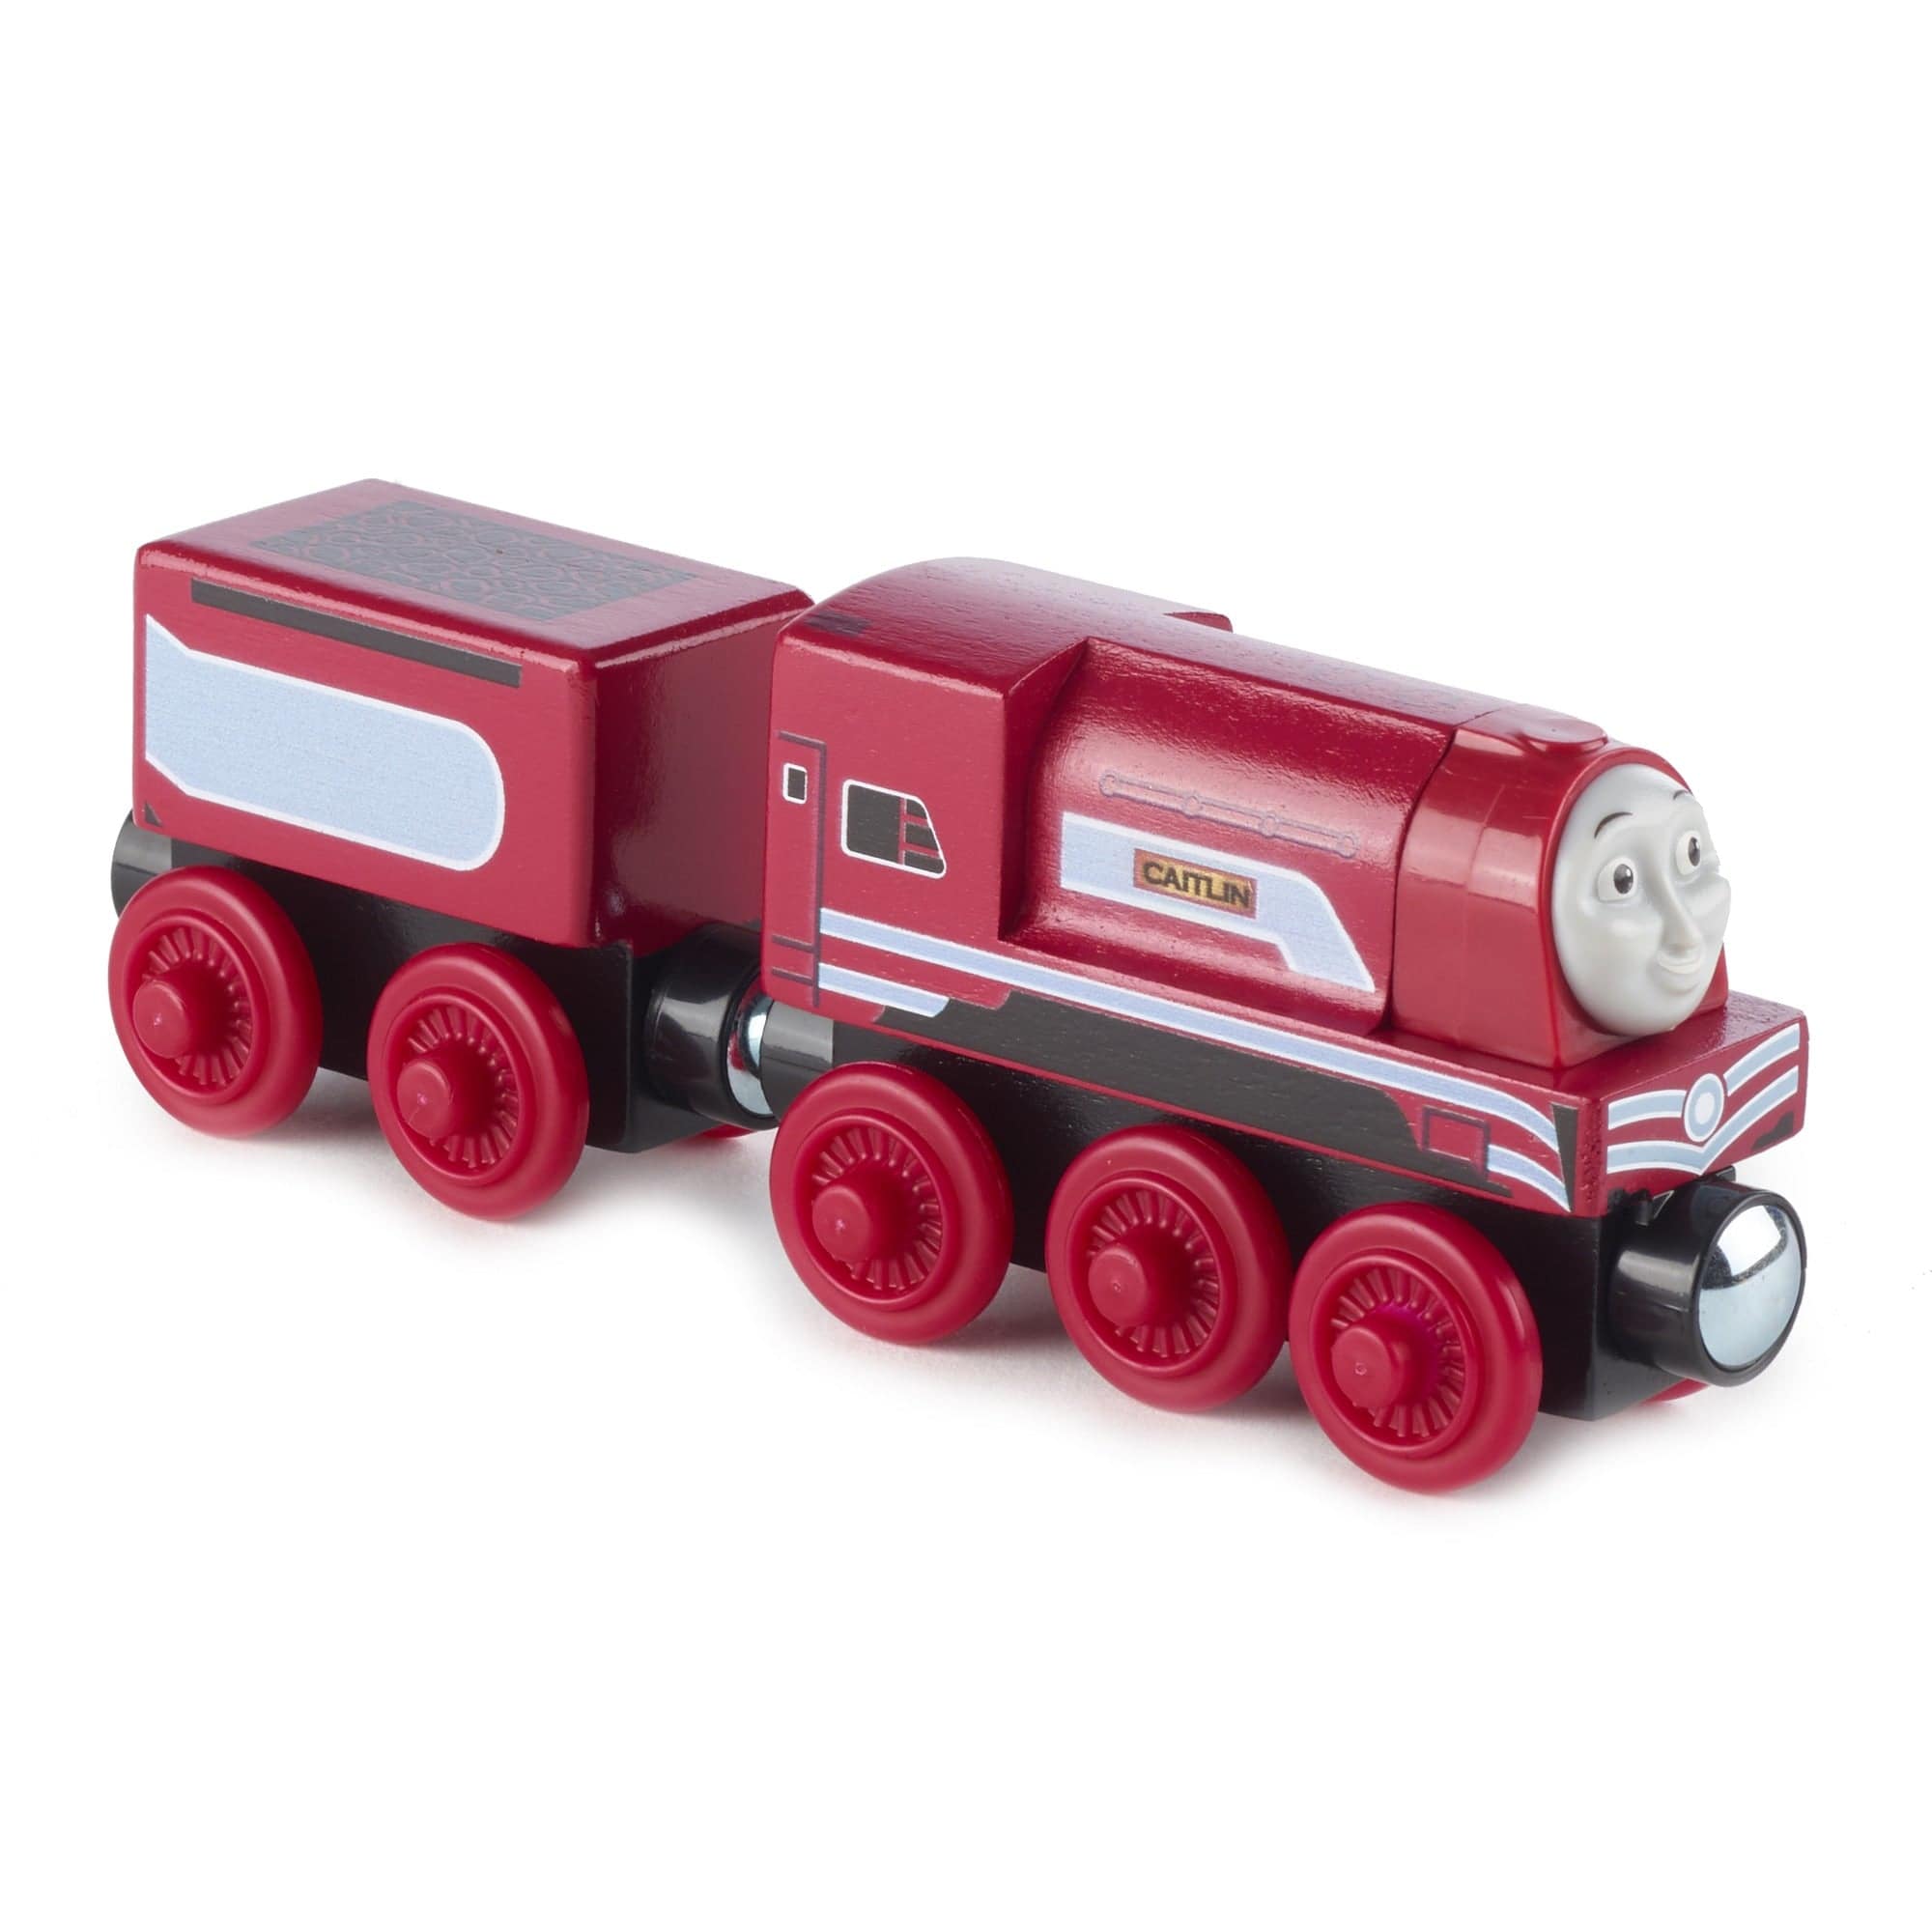 Fisher Price-Thomas & Friends - Caitlin-GGG84-Legacy Toys